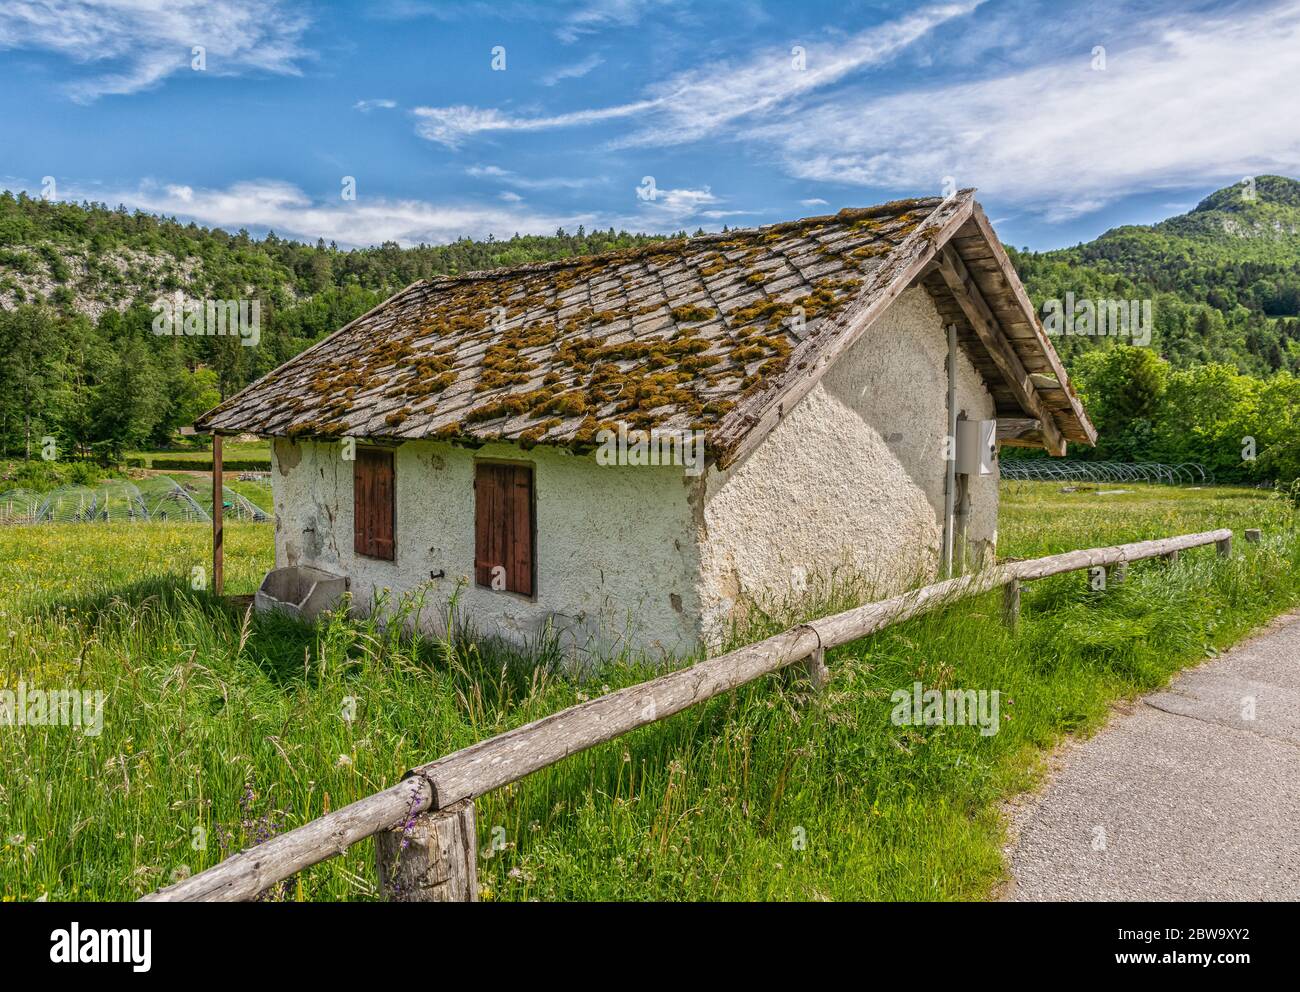 Small wooden house in a green mountain valley of Trentino Alto Adige, northern Italy, Europe. Stock Photo